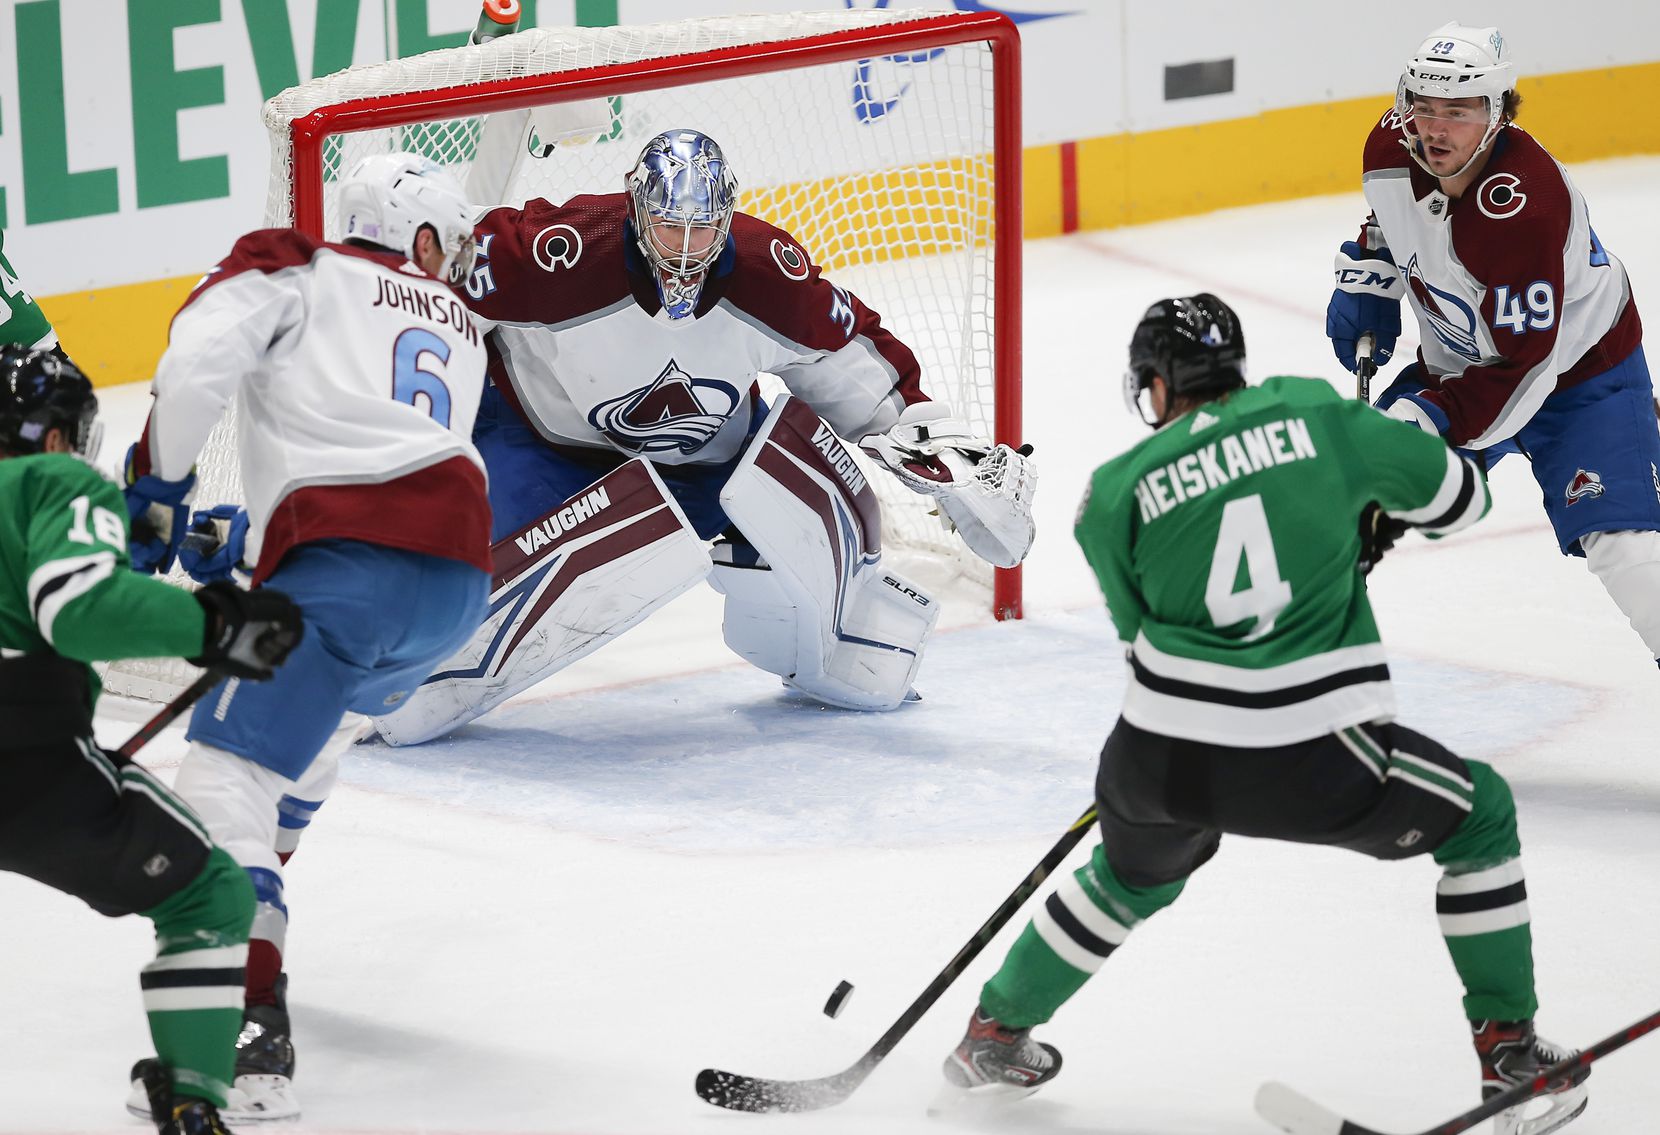 Dallas Stars defenseman Miro Heiskanen (4) attempts a shot as Colorado Avalanche goaltender Darcy Kuemper (35) defends during the first period of an NHL hockey game in Dallas, Friday, November 26, 2021. (Brandon Wade/Special Contributor)